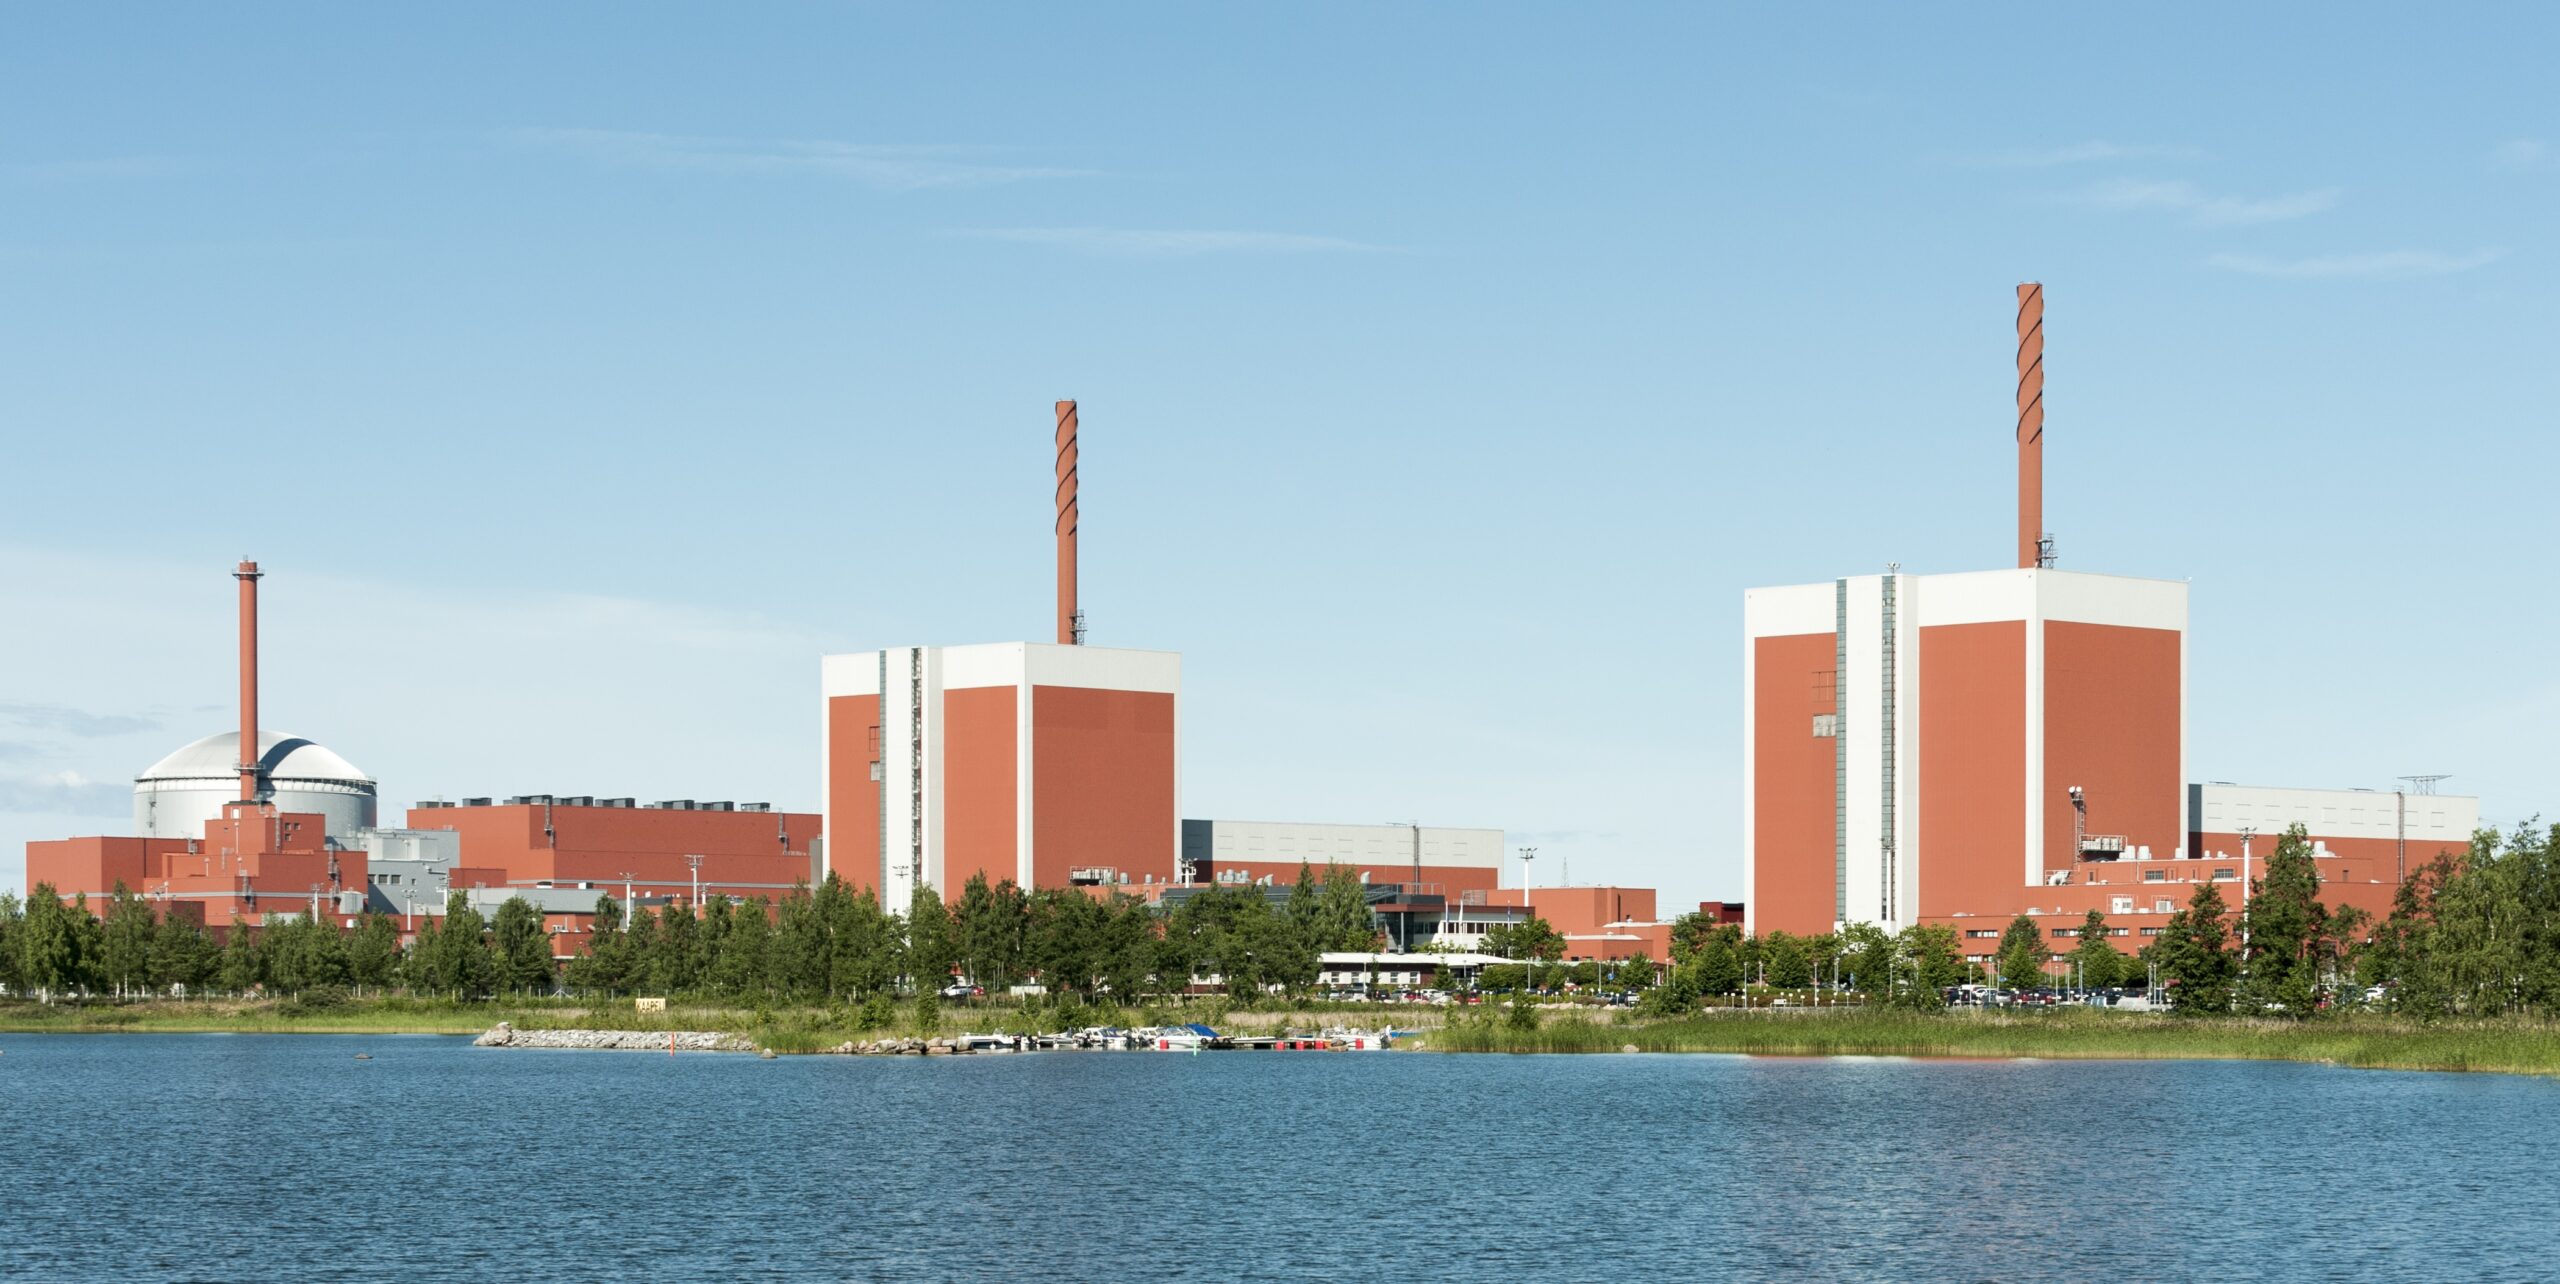 Olkiluoto Nuclear Power Plant 2015 07 21 001 cropped scaled